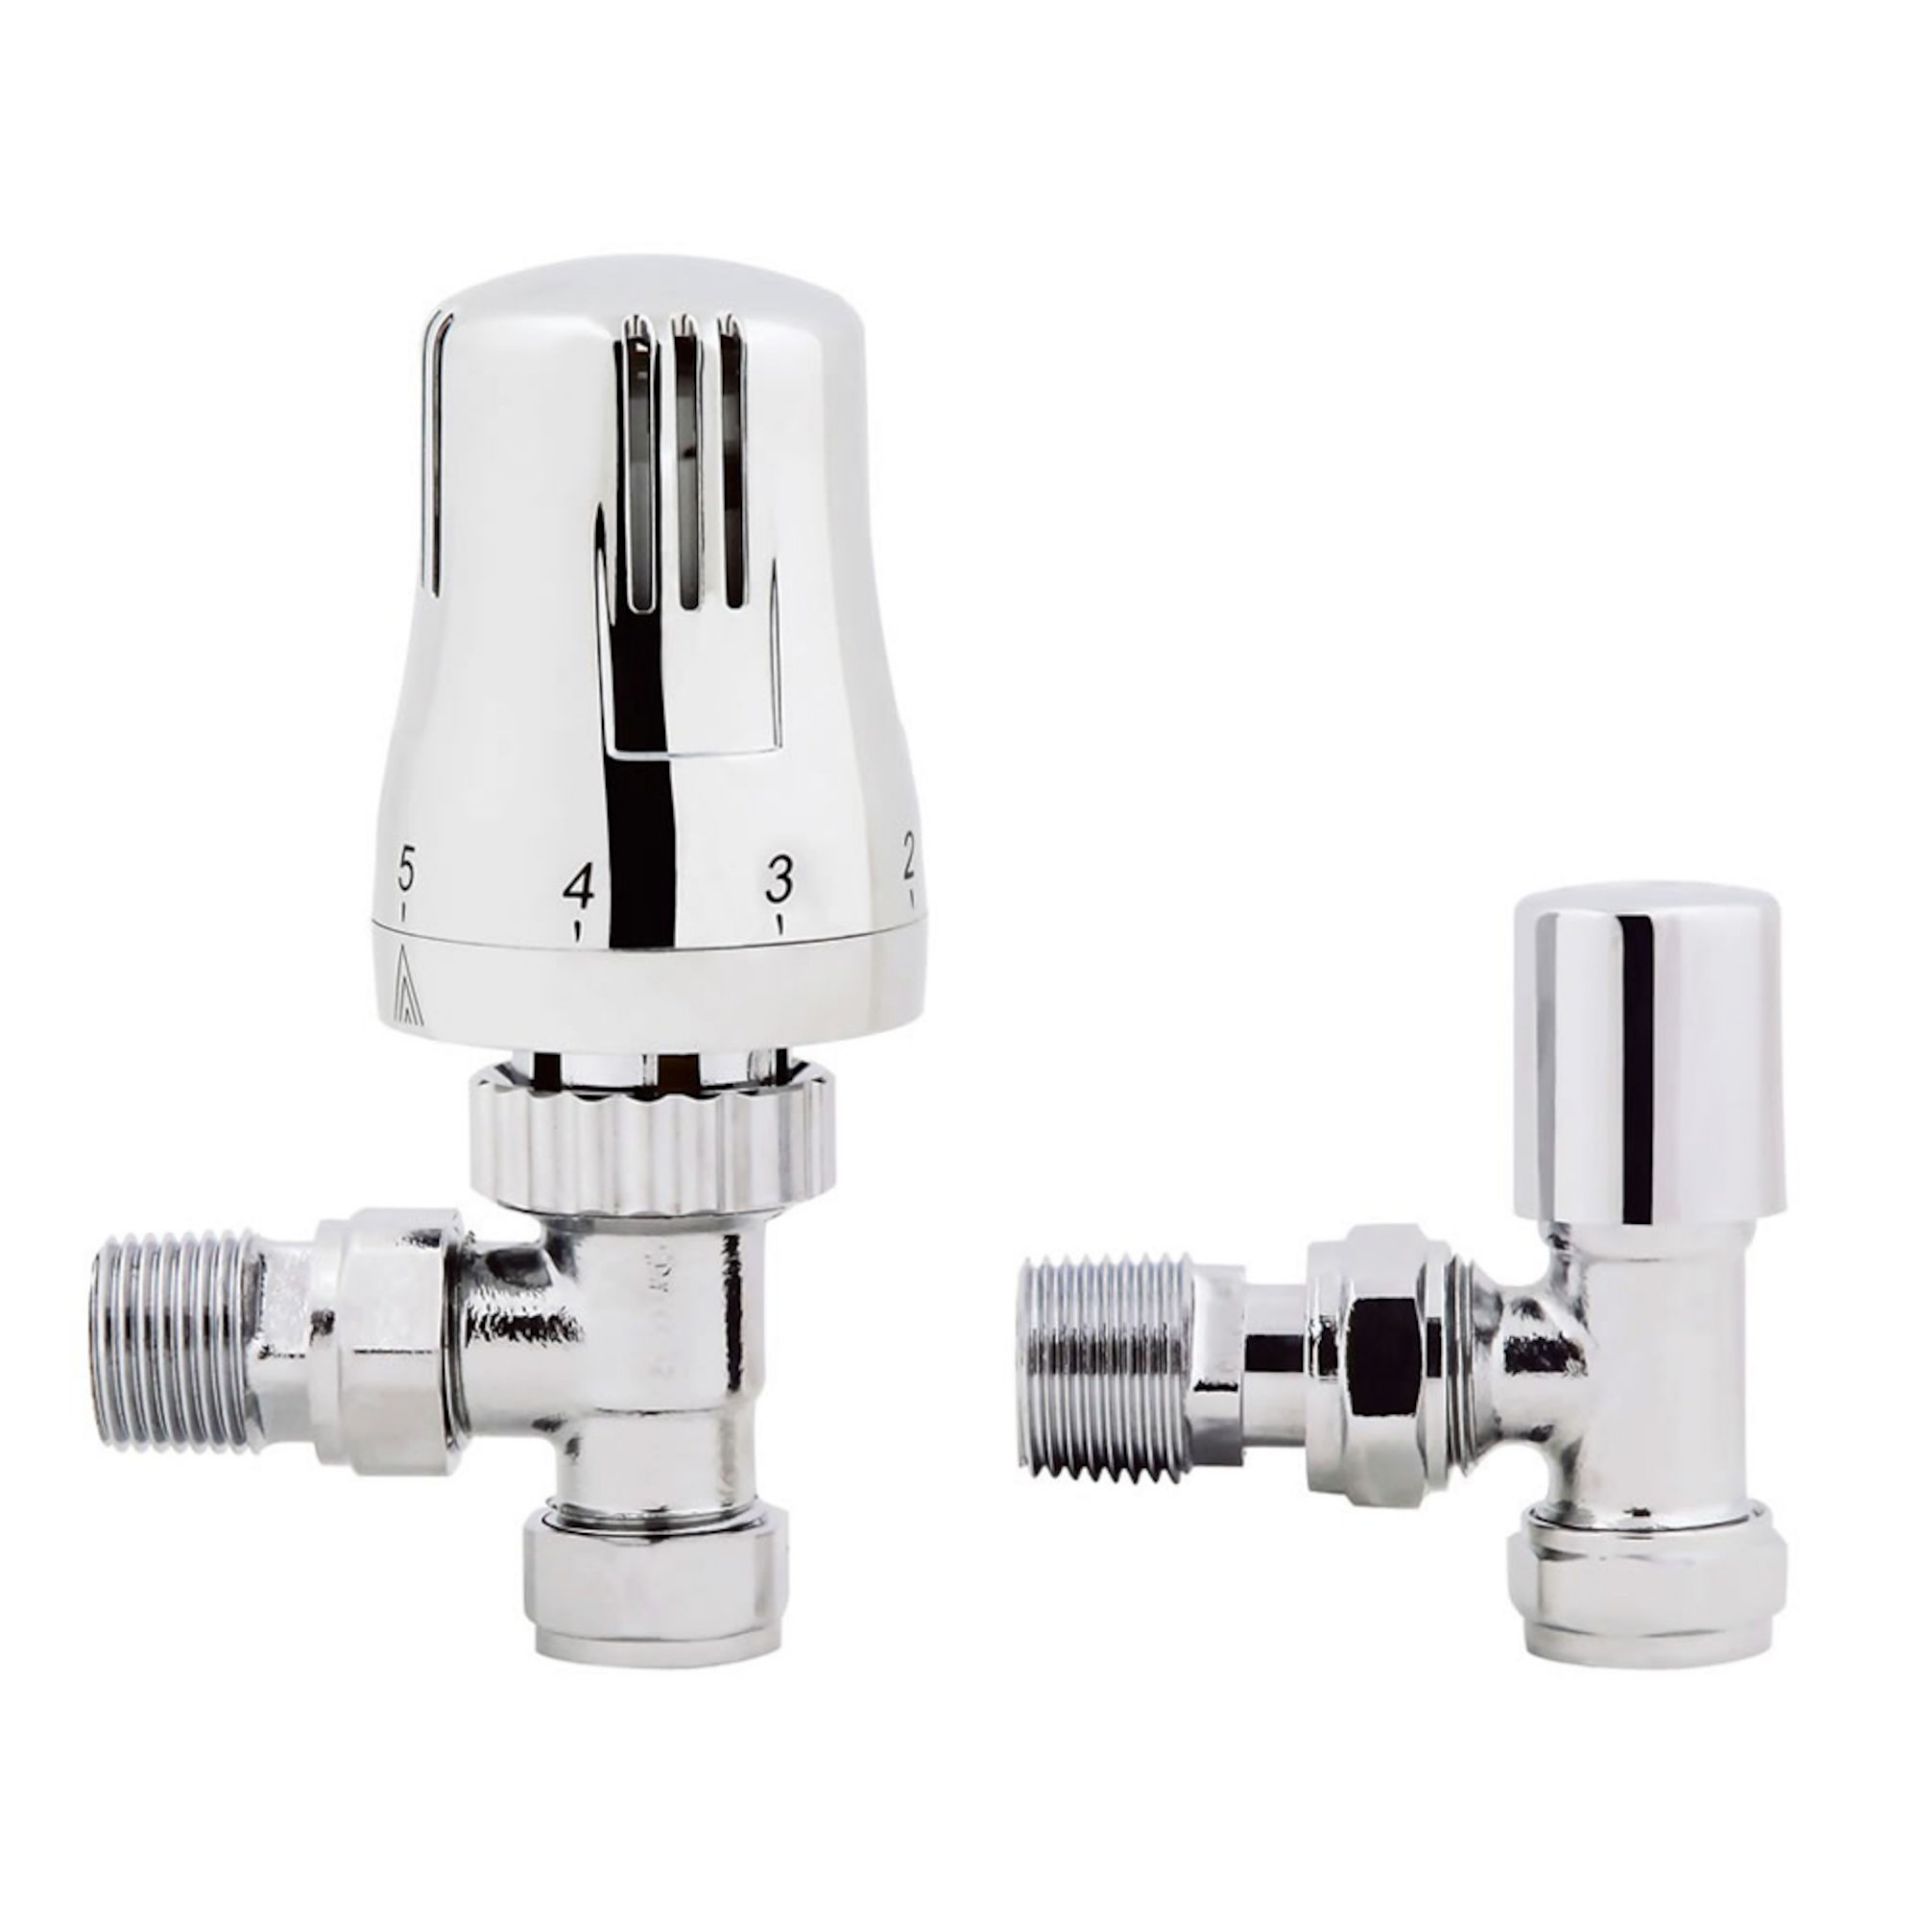 (Z1014) 15mm Standard Connection Thermostatic Angled Chrome Radiator Valves Chrome Plated Soli... - Image 2 of 3